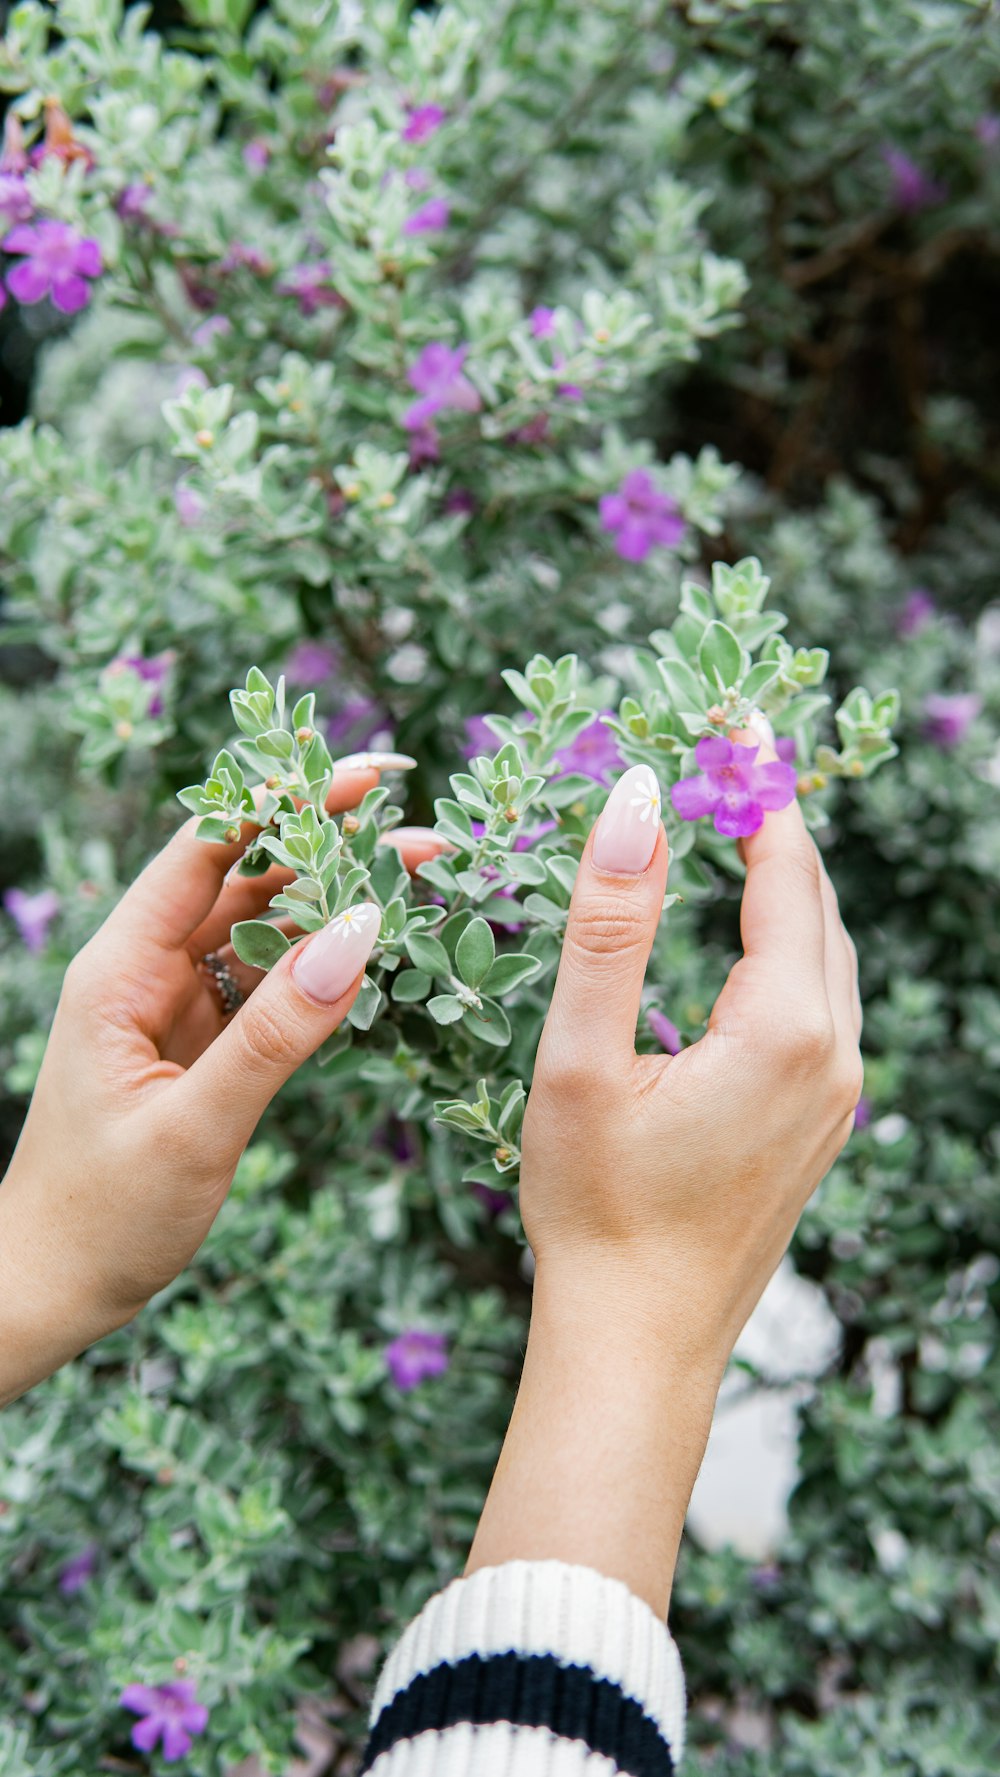 a woman's hands holding a plant with purple flowers